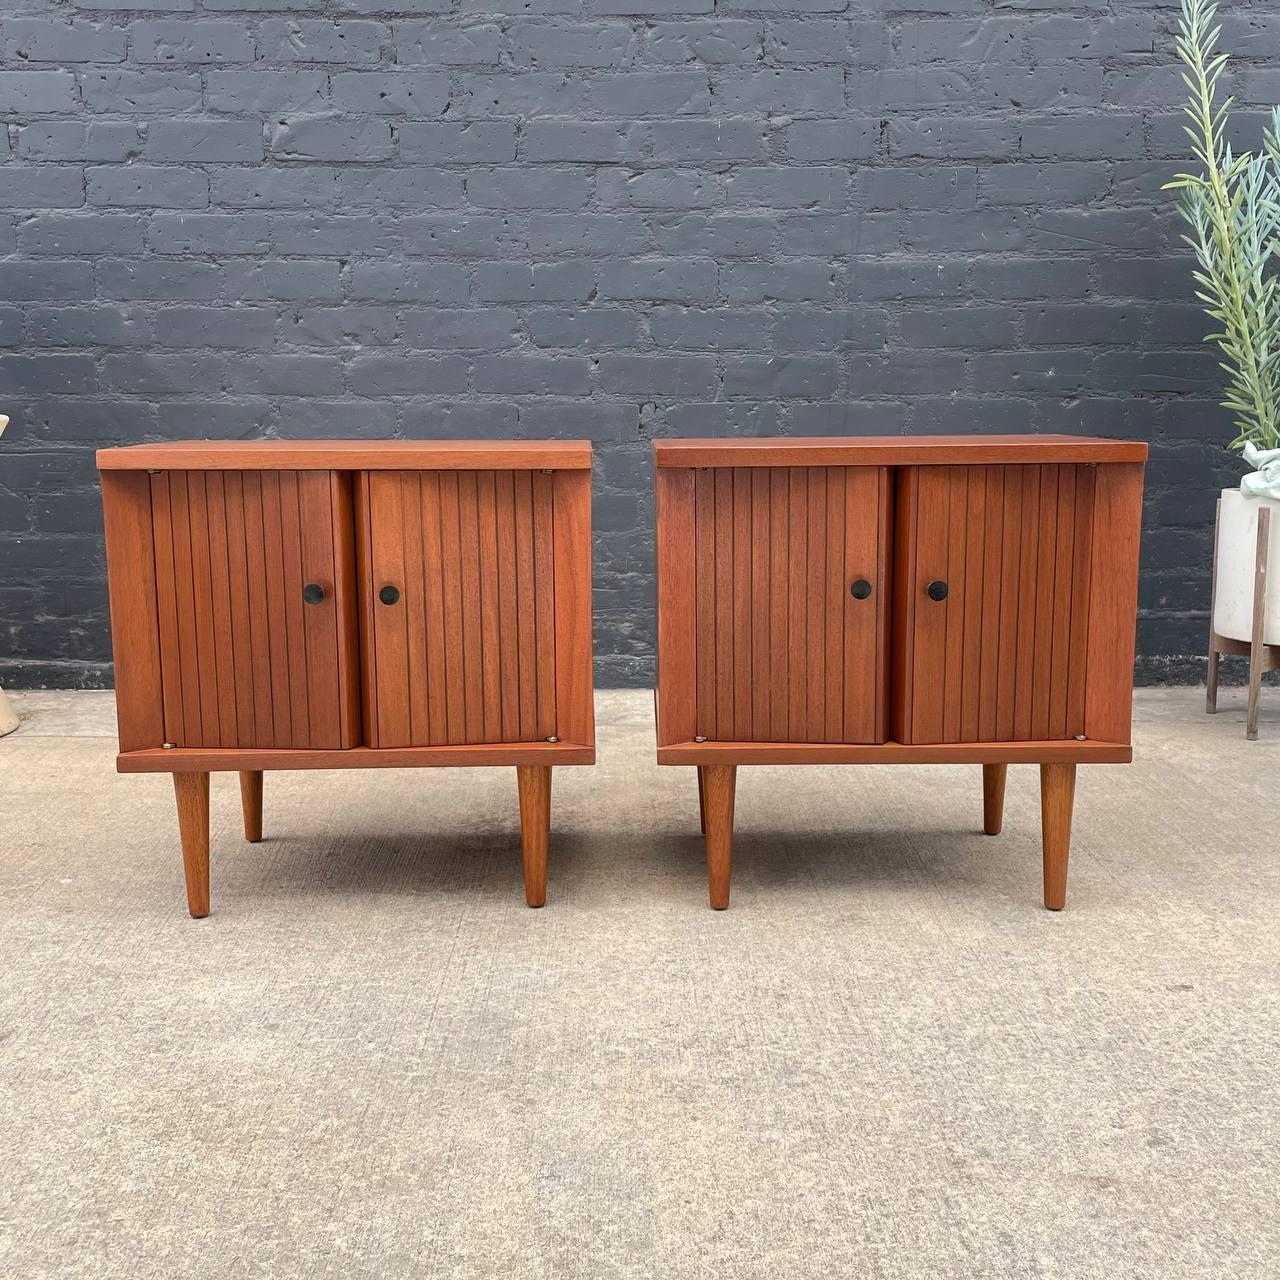 Mid-20th Century Newly Refinished - Pair of Mid-Century Modern Walnut Night Stands by Basic-Witz